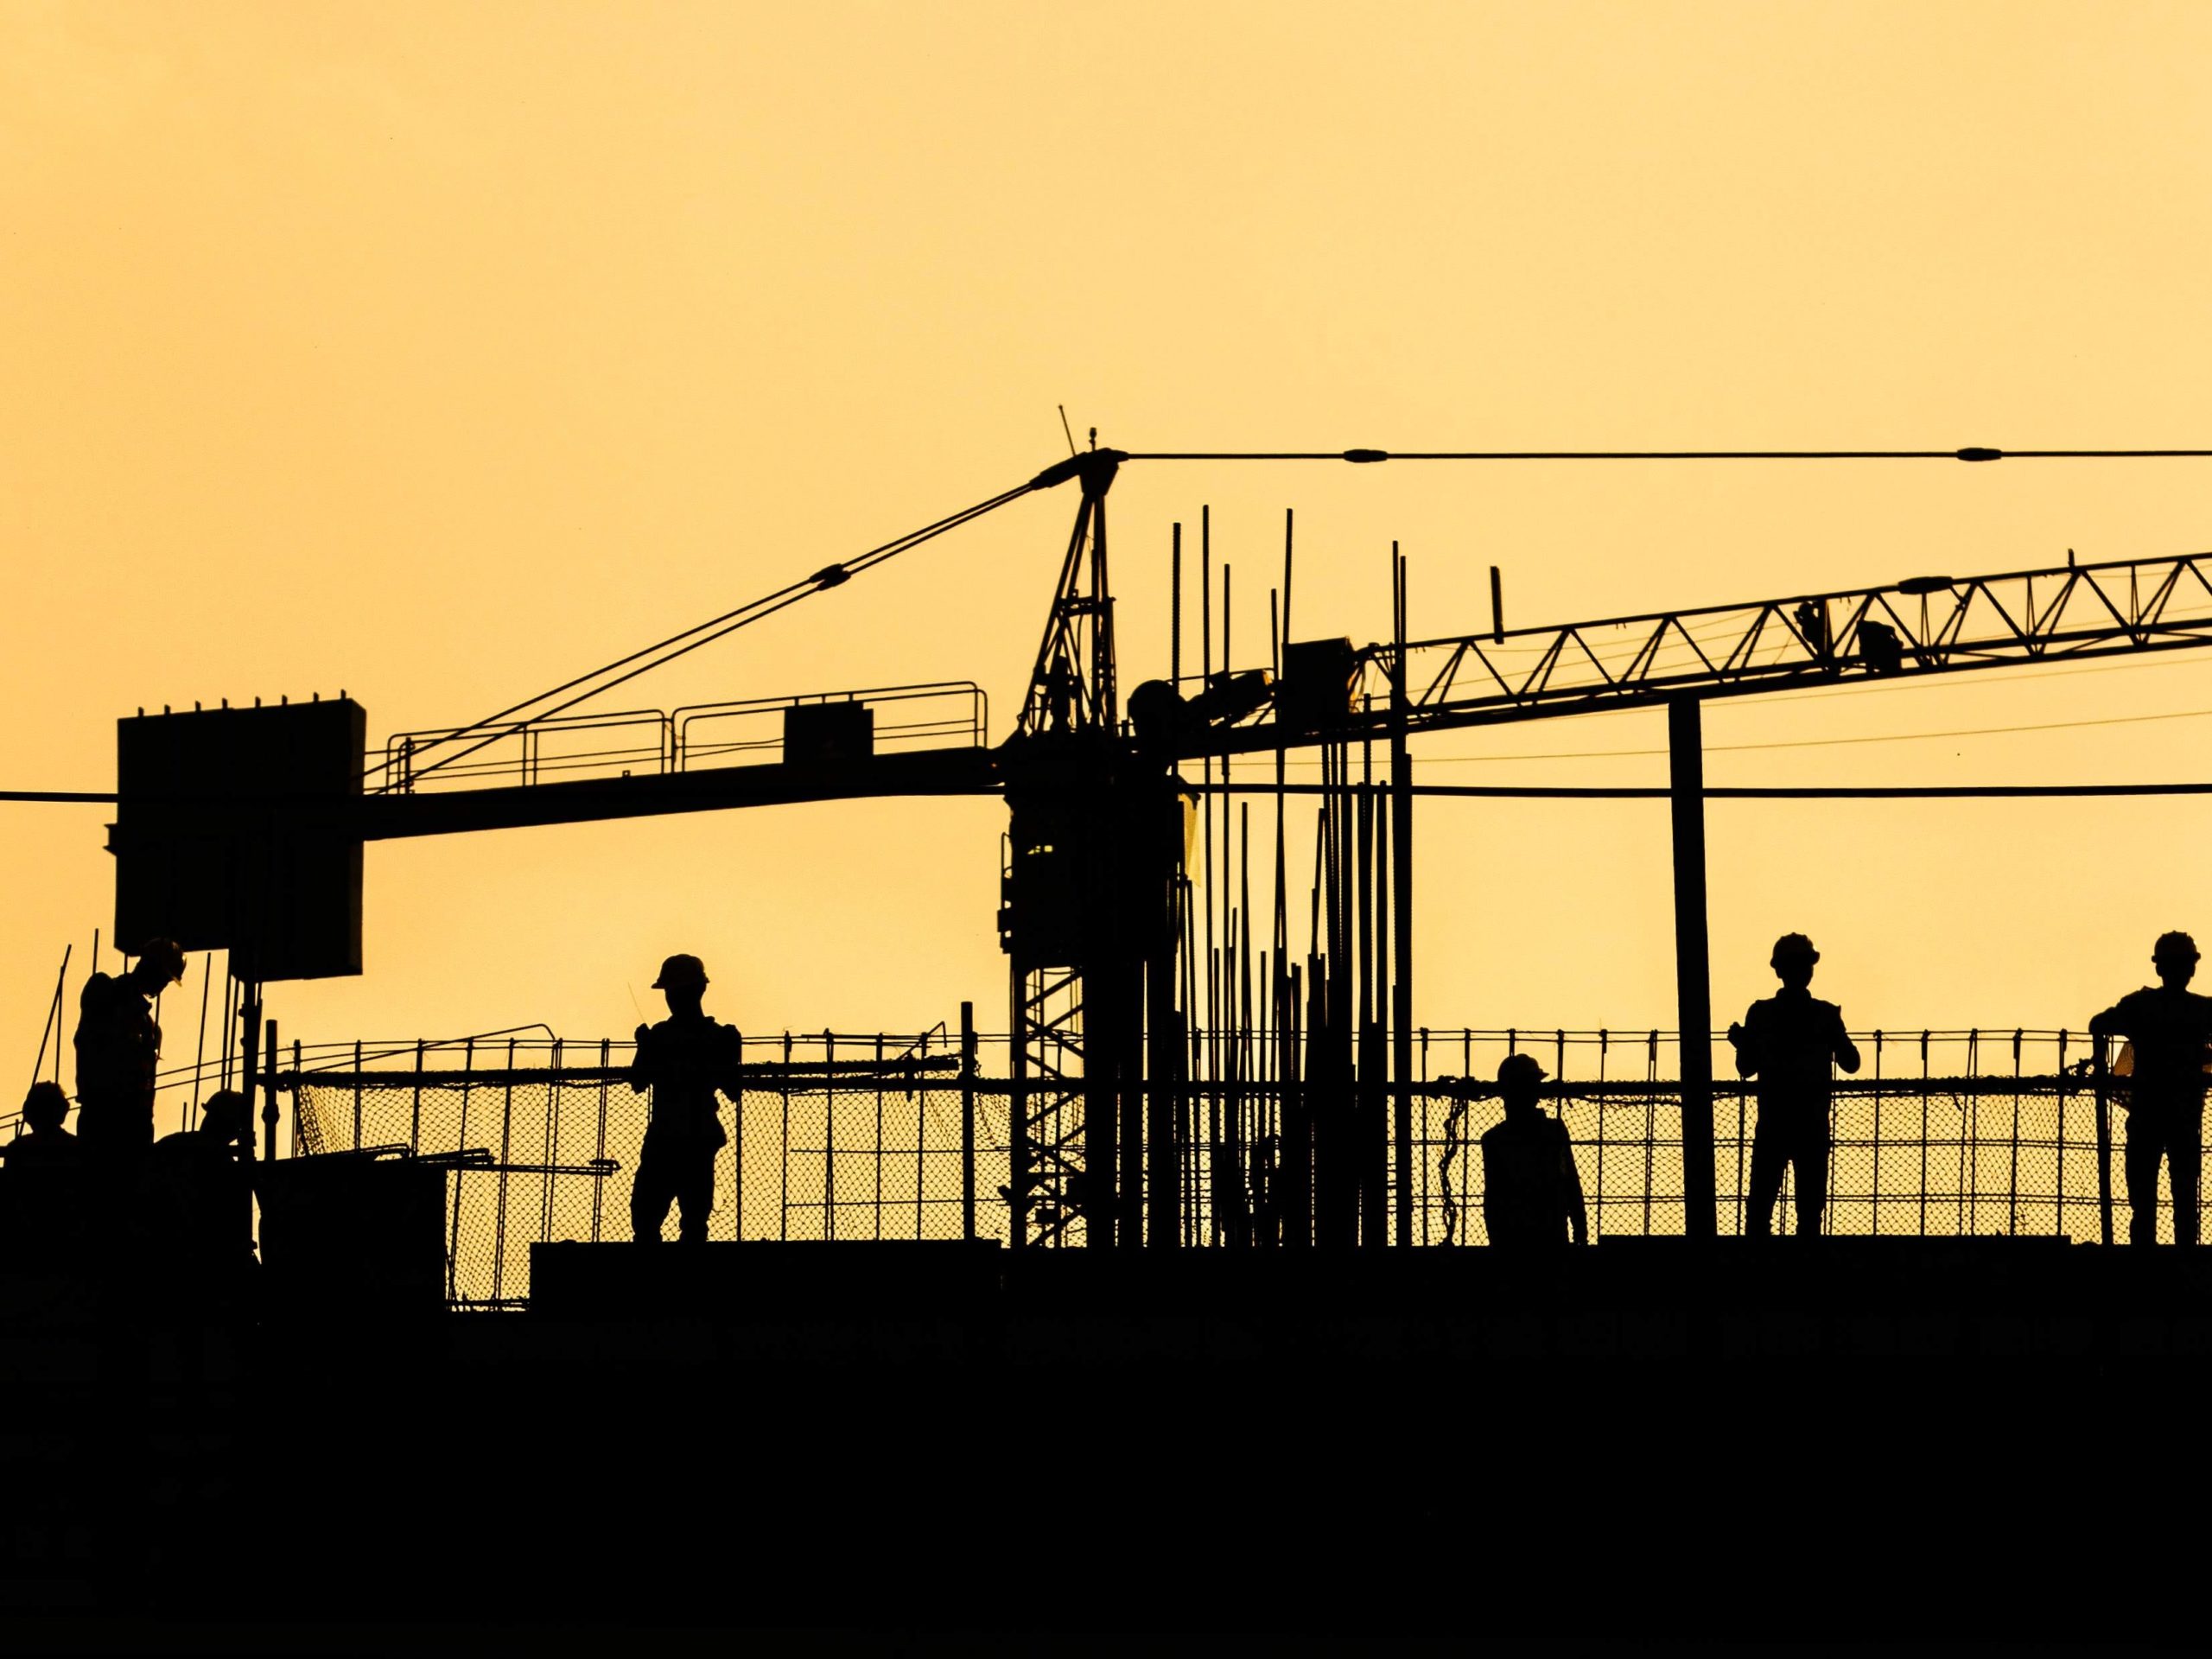 Construction workers on a site, with a crane, situated on the horizon with an overcast of a shadow. 